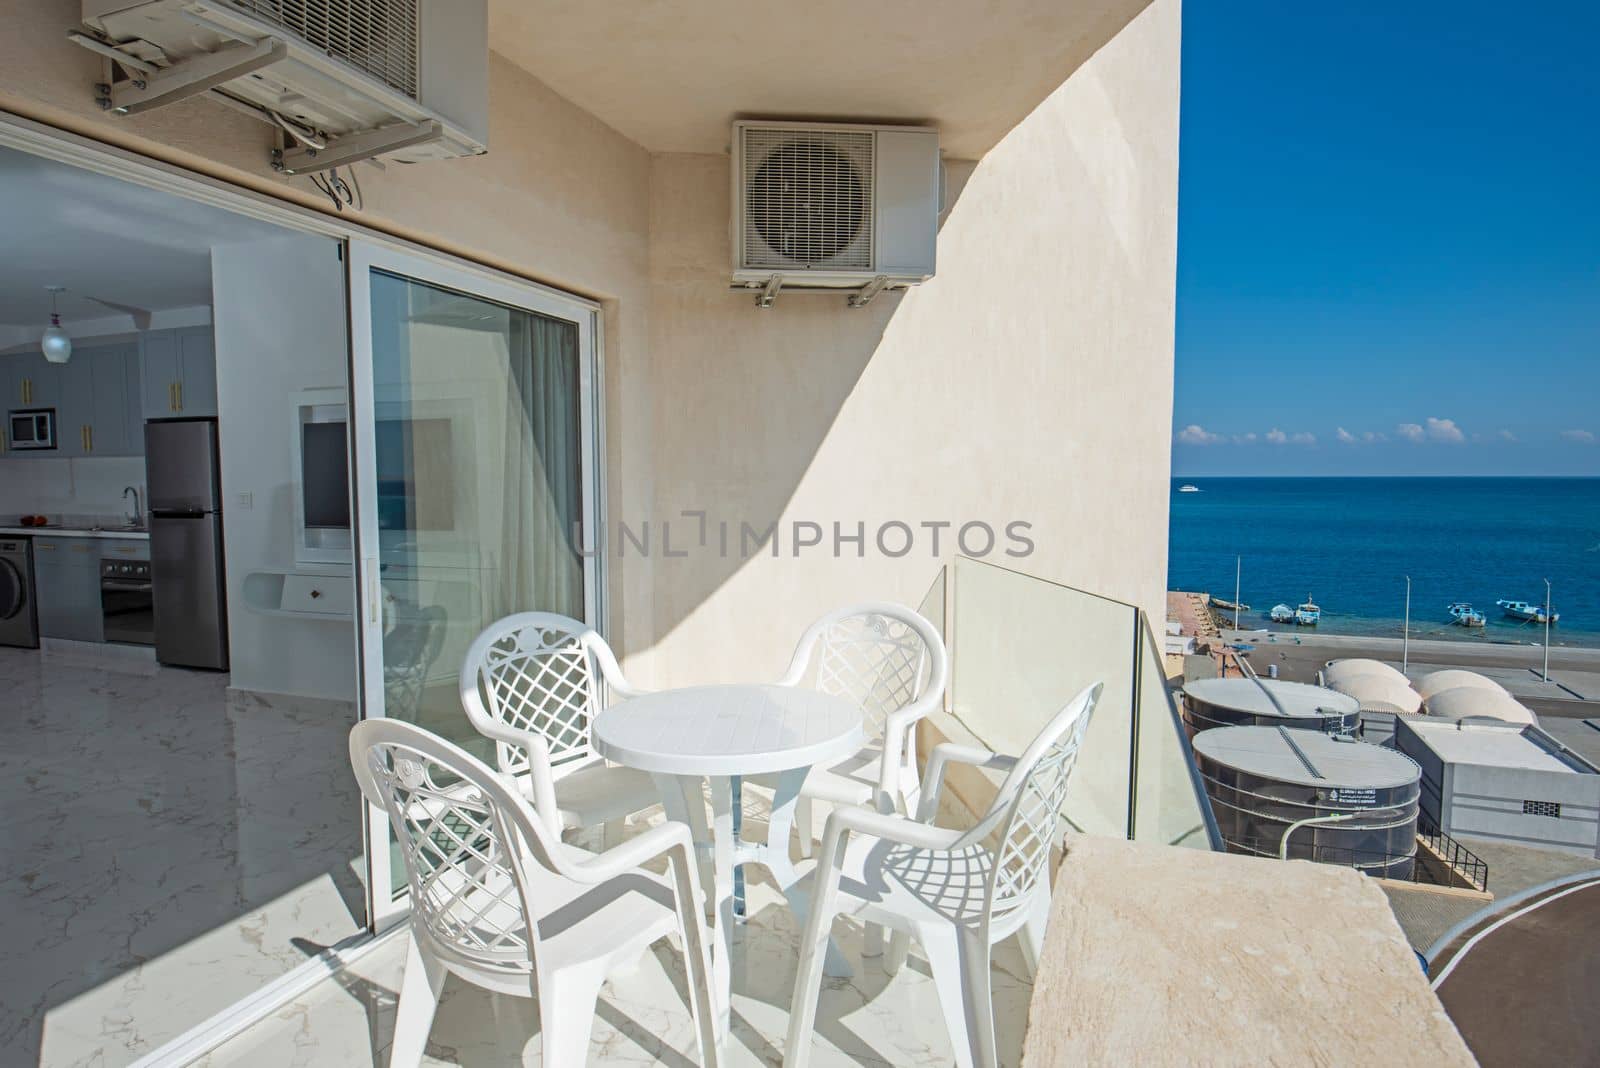 Terrace furniture of a luxury apartment in tropical resort with furniture and sea view from balcony